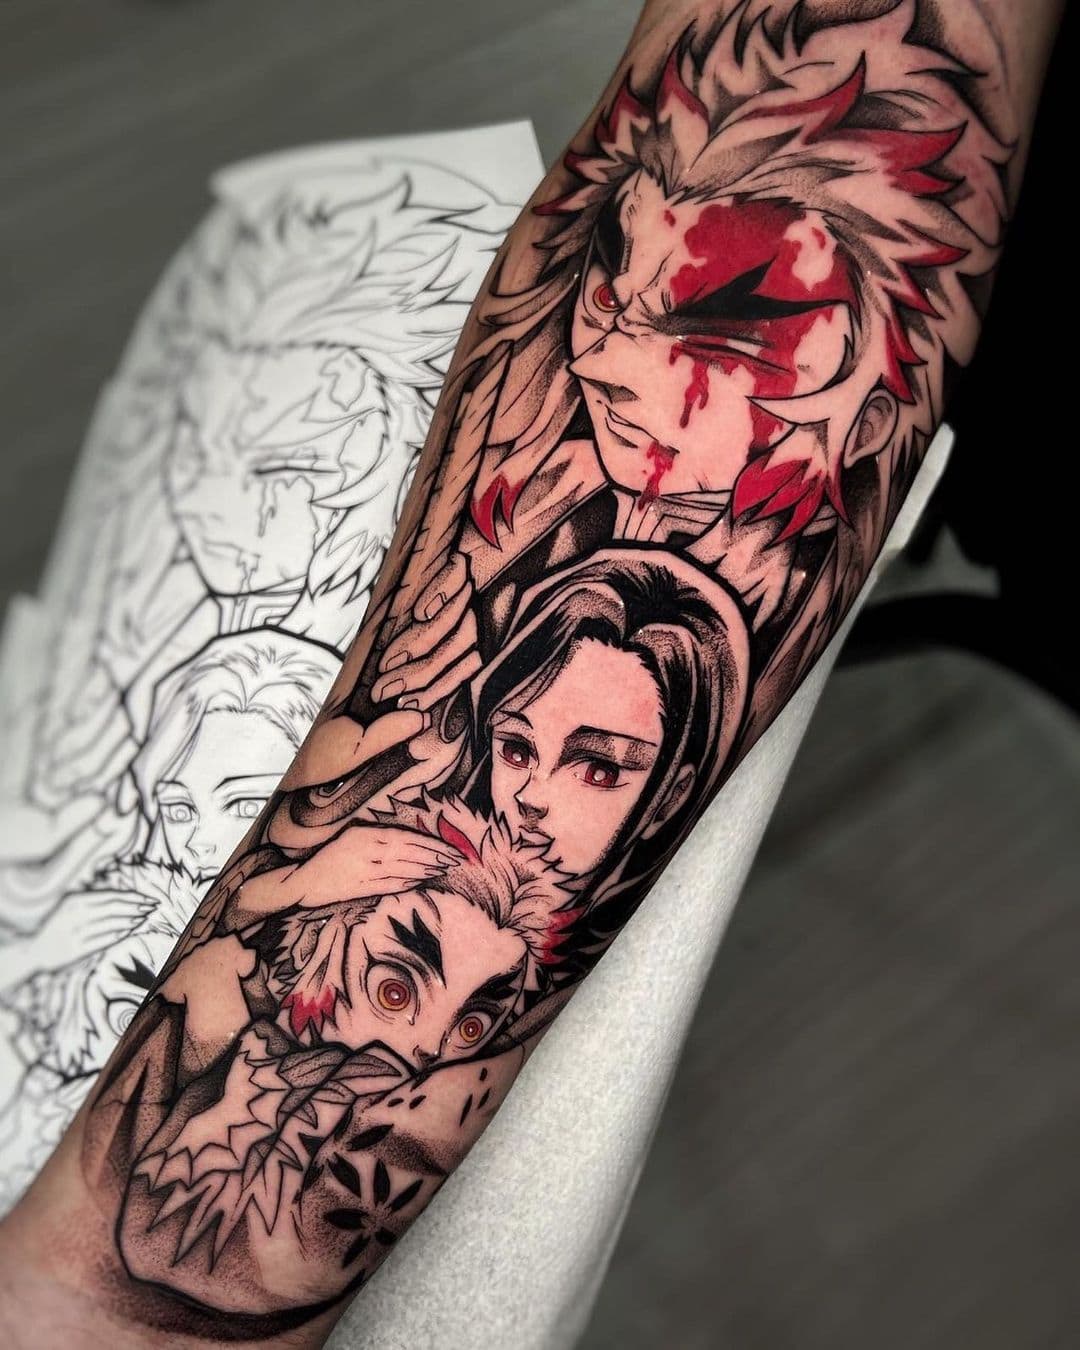 Felipe Kross on Instagram tbt of this Tanjiros piece Ive done a few  months ago  Thank you for all the support guy  Anime tattoos Tattoos  Slayer tattoo